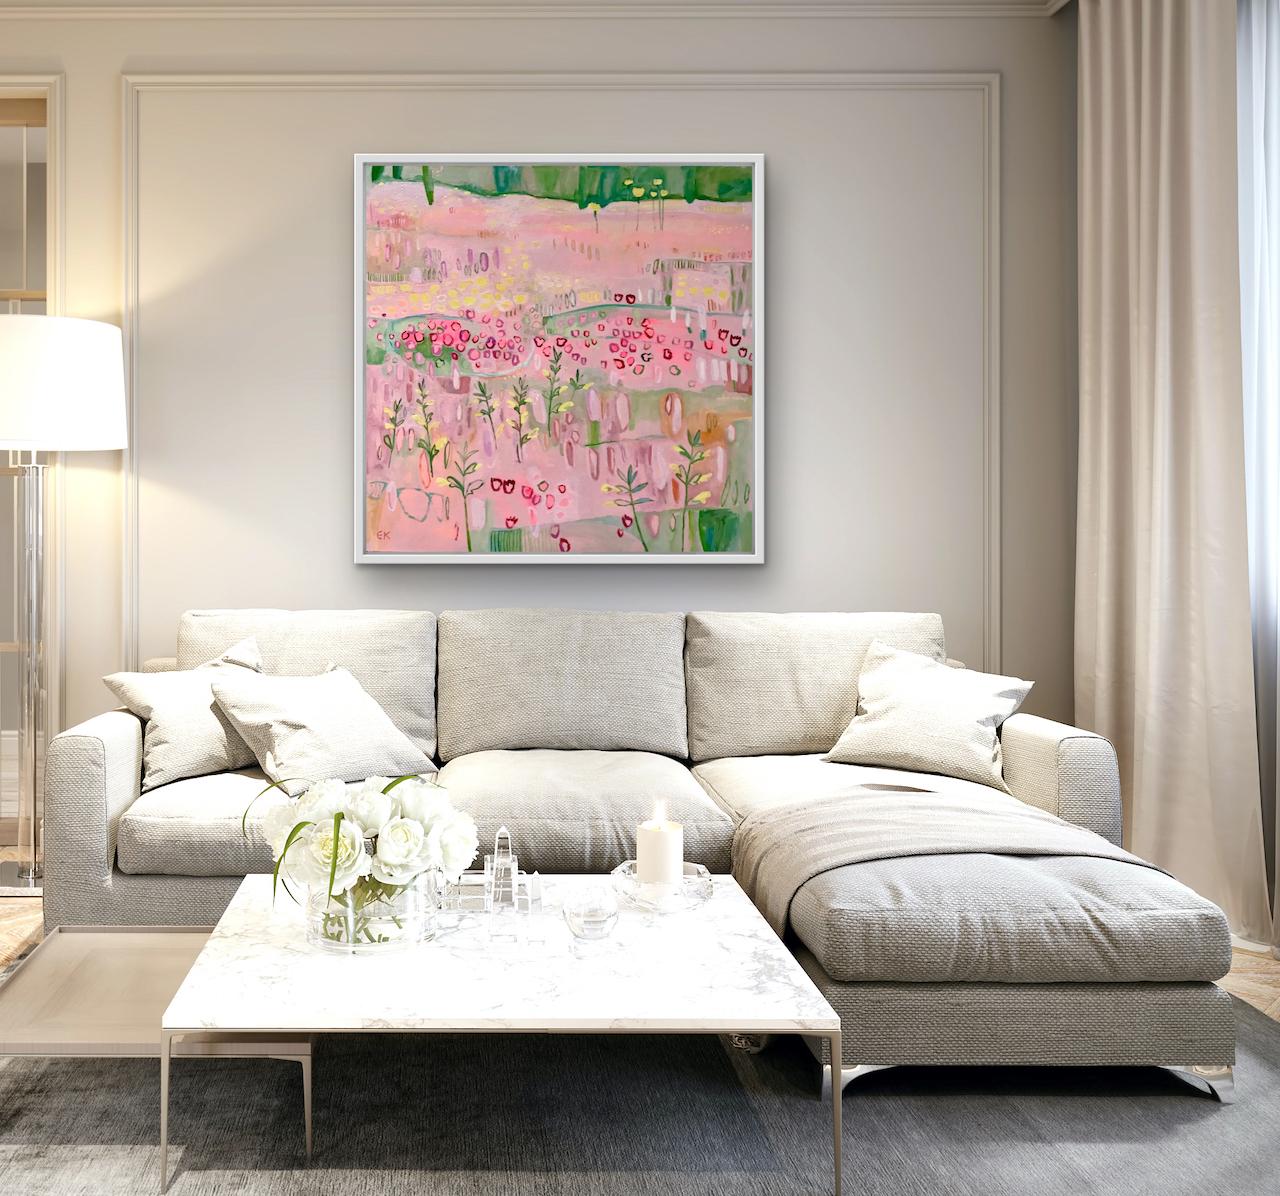 Red Clover and Yellow Rattle, Floral Landscape Painting, Bright Pink Artworks 7